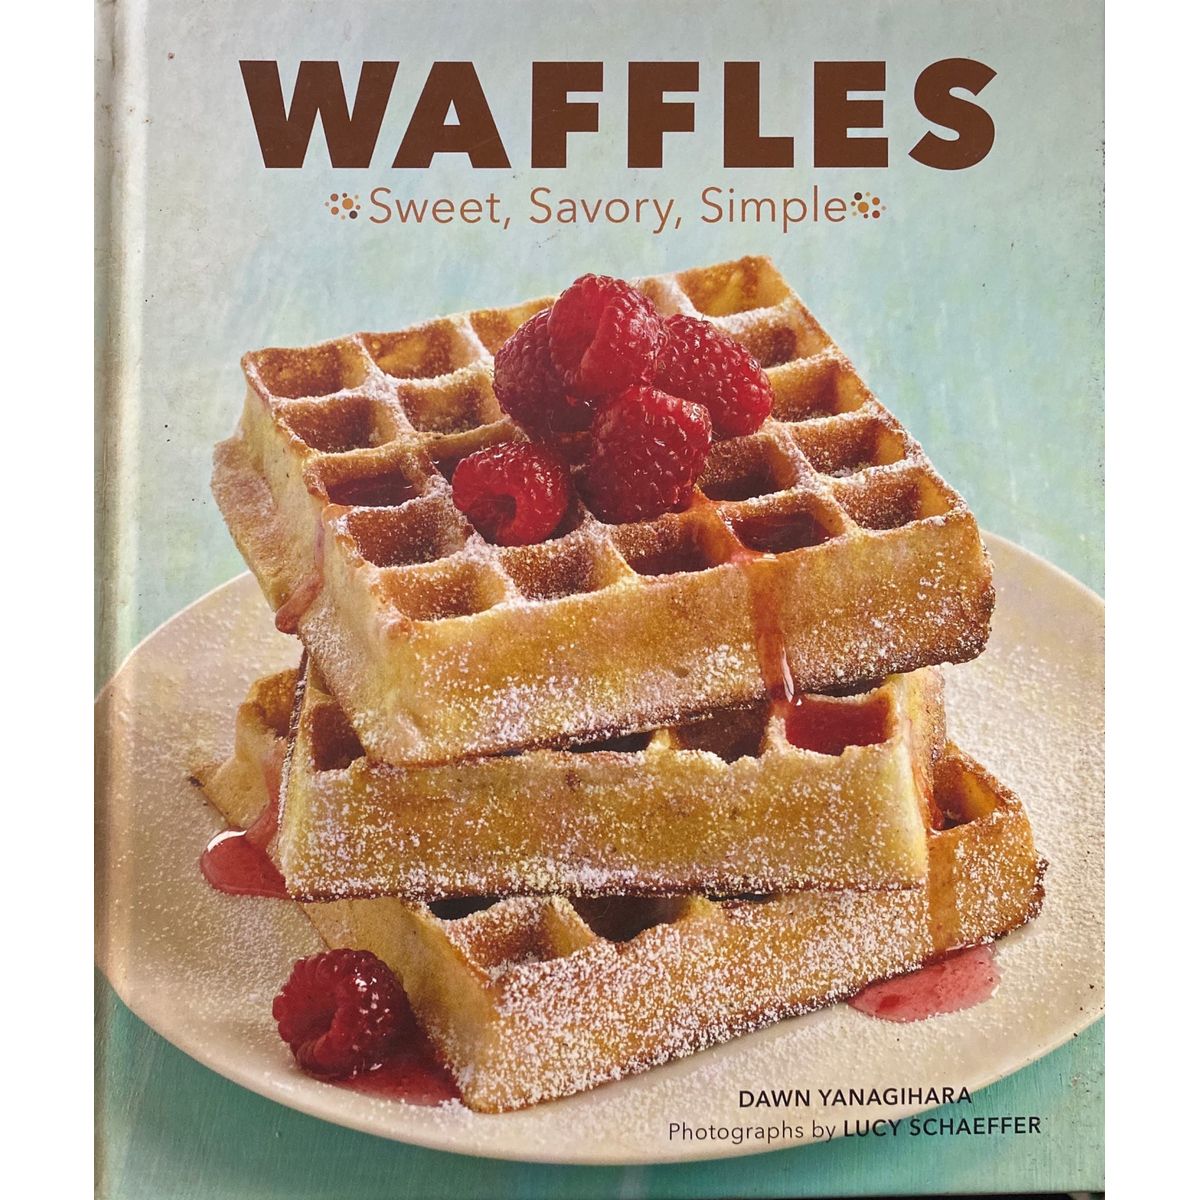 ISBN: 9781452107035 / 1452107033 - Waffles: Sweet, Savory, Simple by Dawn Yanagihara, photographs by Lucy Schaeffer [2012]